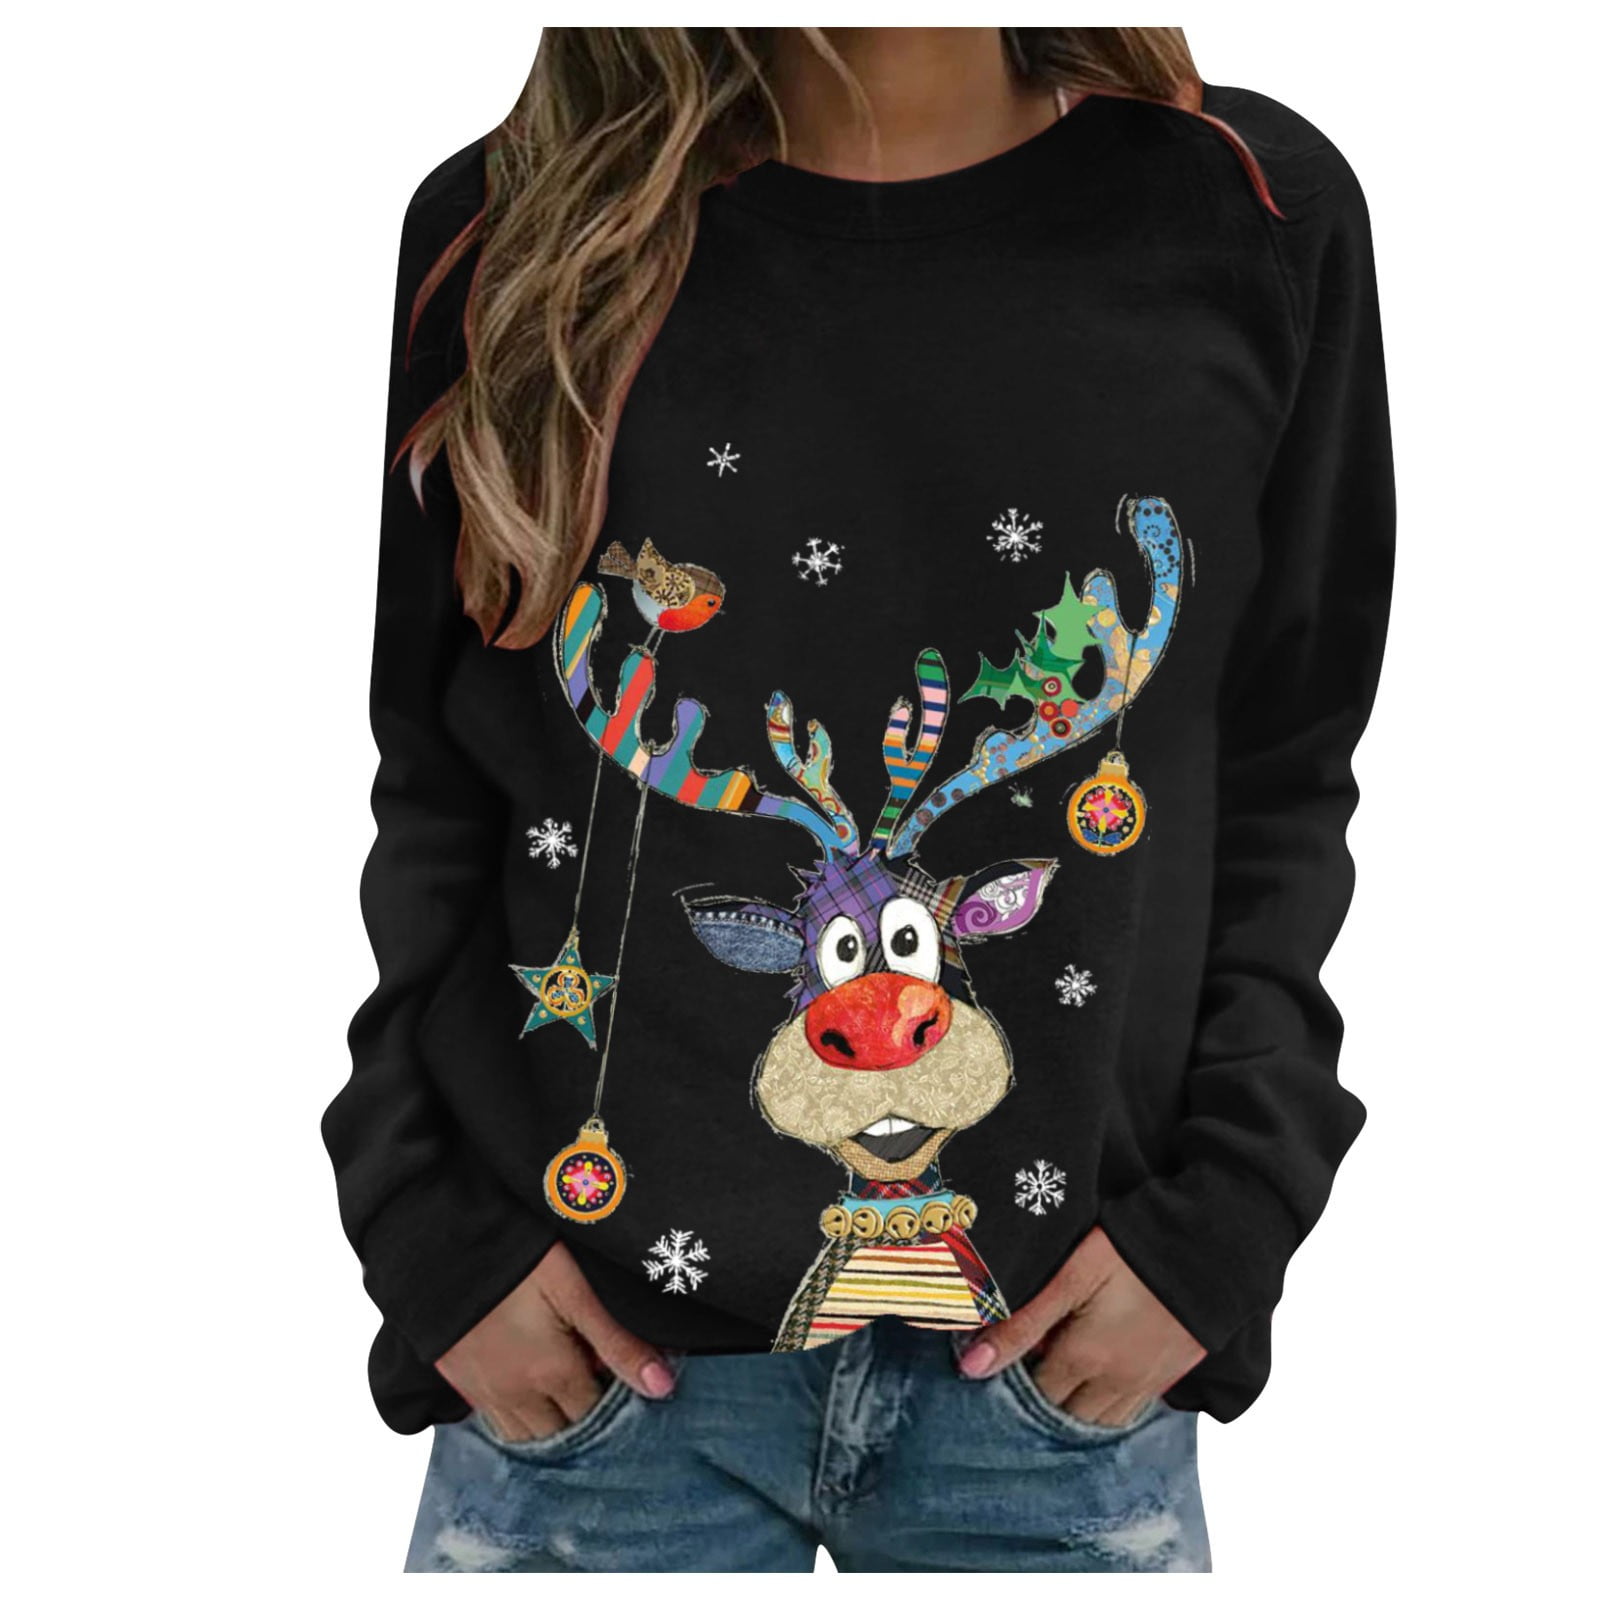 Womens Ladies Funny Christmas Novelty Berry Xmas Sequin Girls Sweater Jumper New 